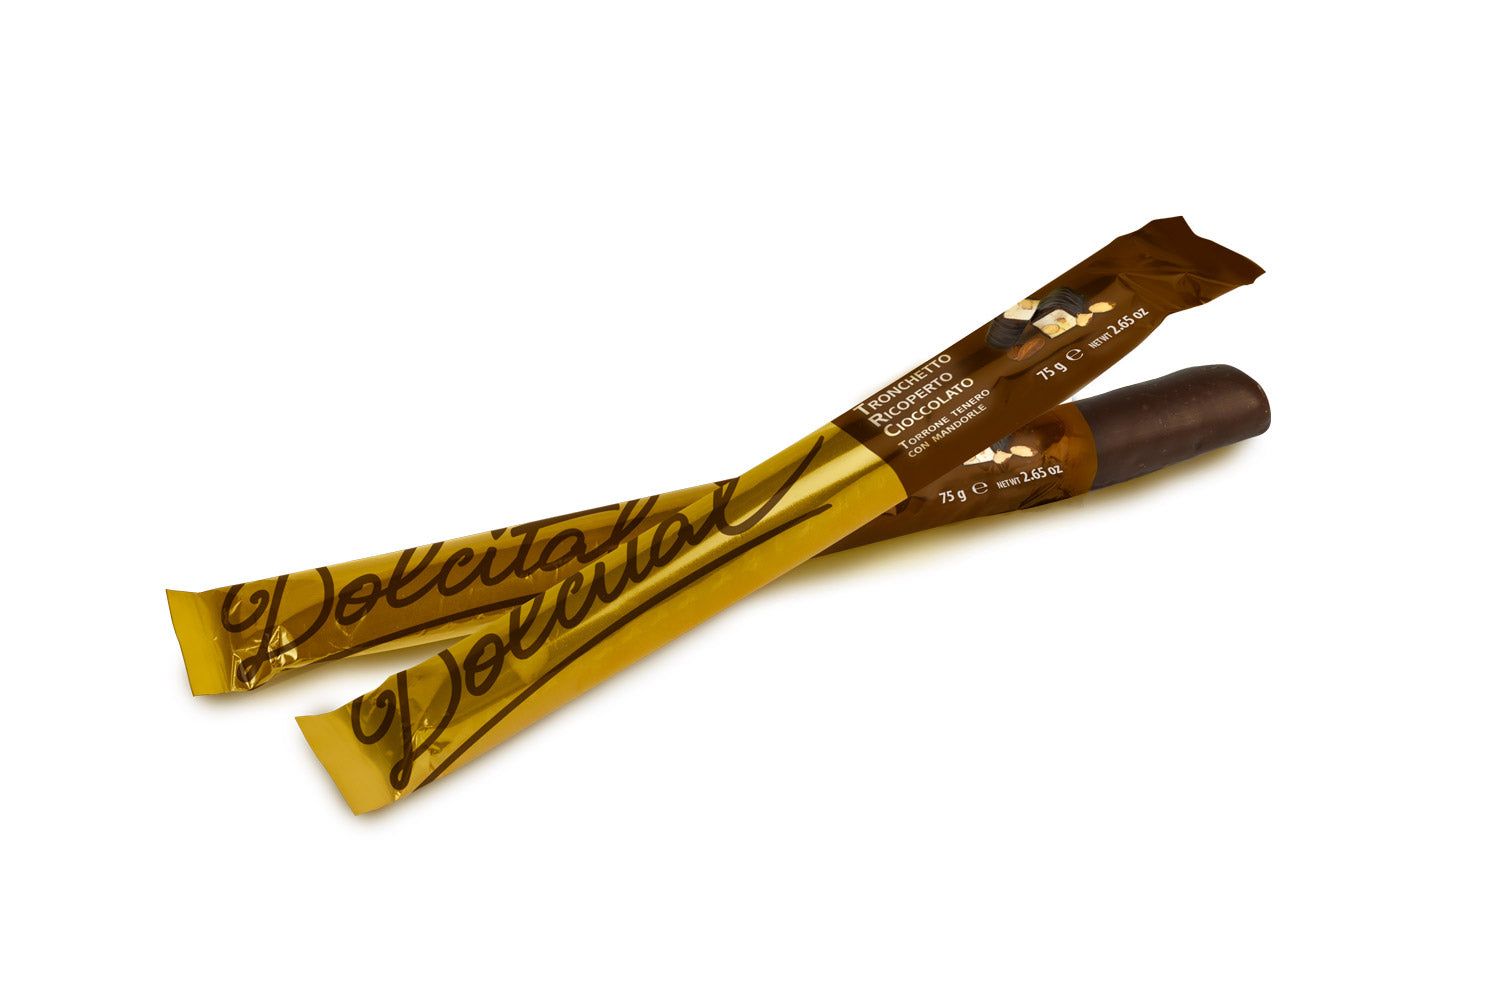 Dolcital Chocolate covered Nougat with Almonds 75g  | Imported and distributed in the UK by Just Gourmet Foods